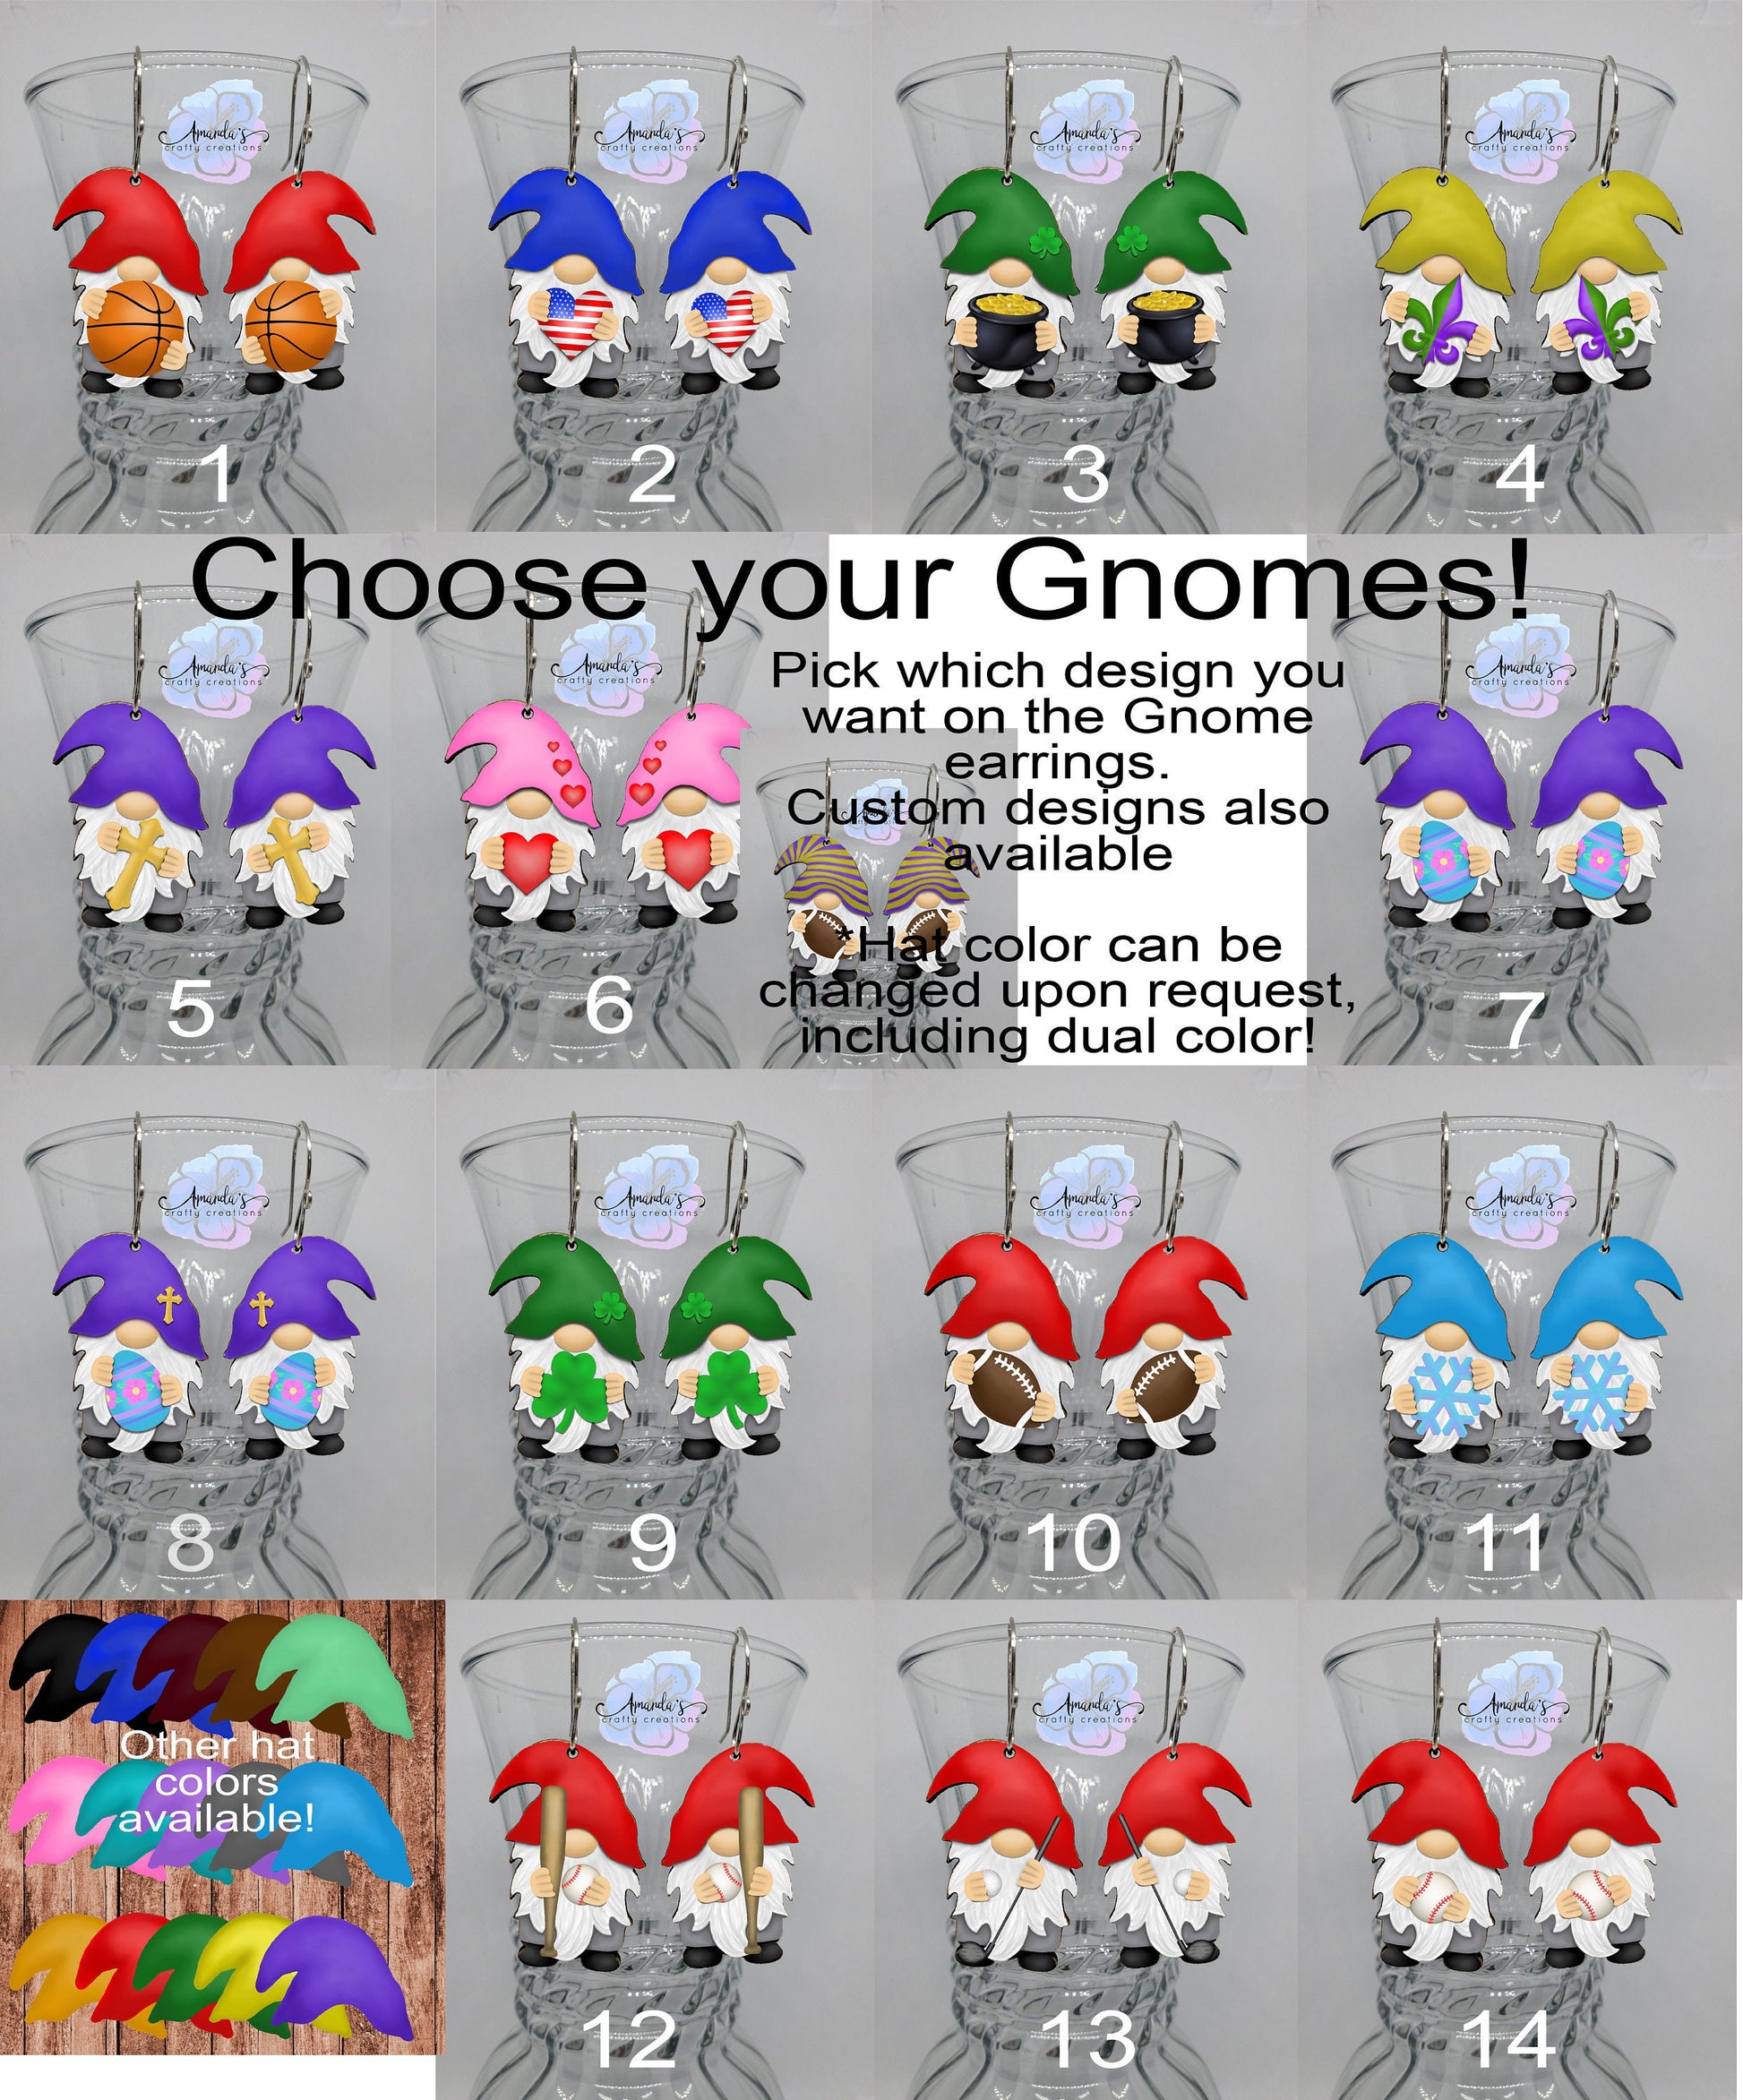 Drop earrings choose your gnome, several hat colors and accessories available for all seasons and holidays